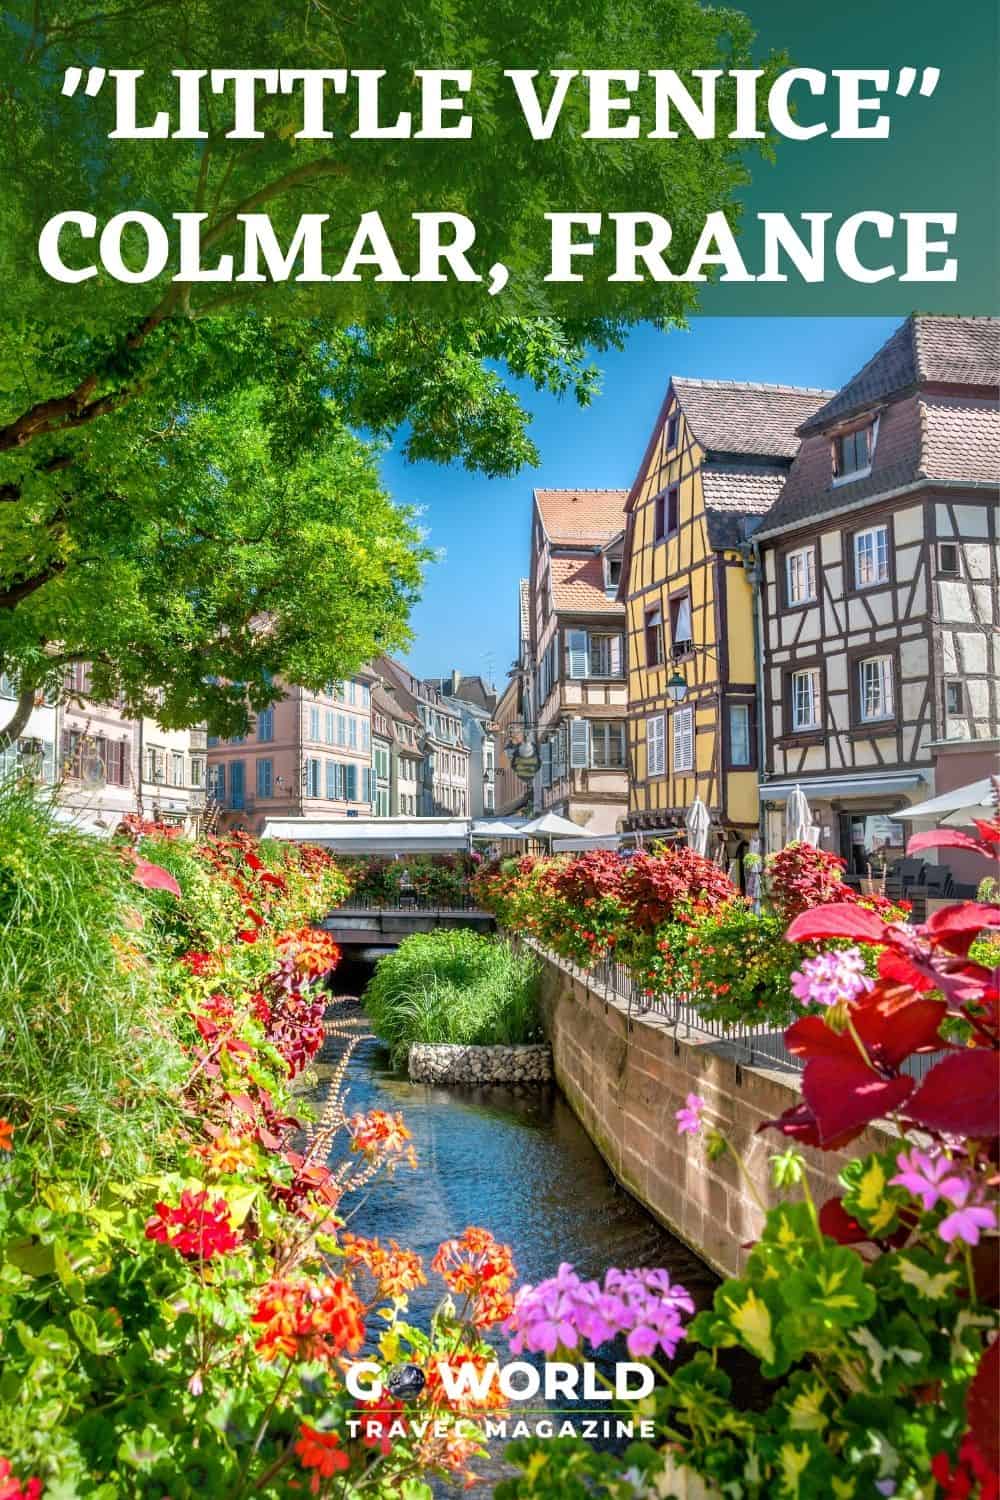 Known as Little Venice, Colmar is a famous city in the Alsace region of France. Discover this farytale town in all its magical splendour.  #France #Alsace #Littlevenice